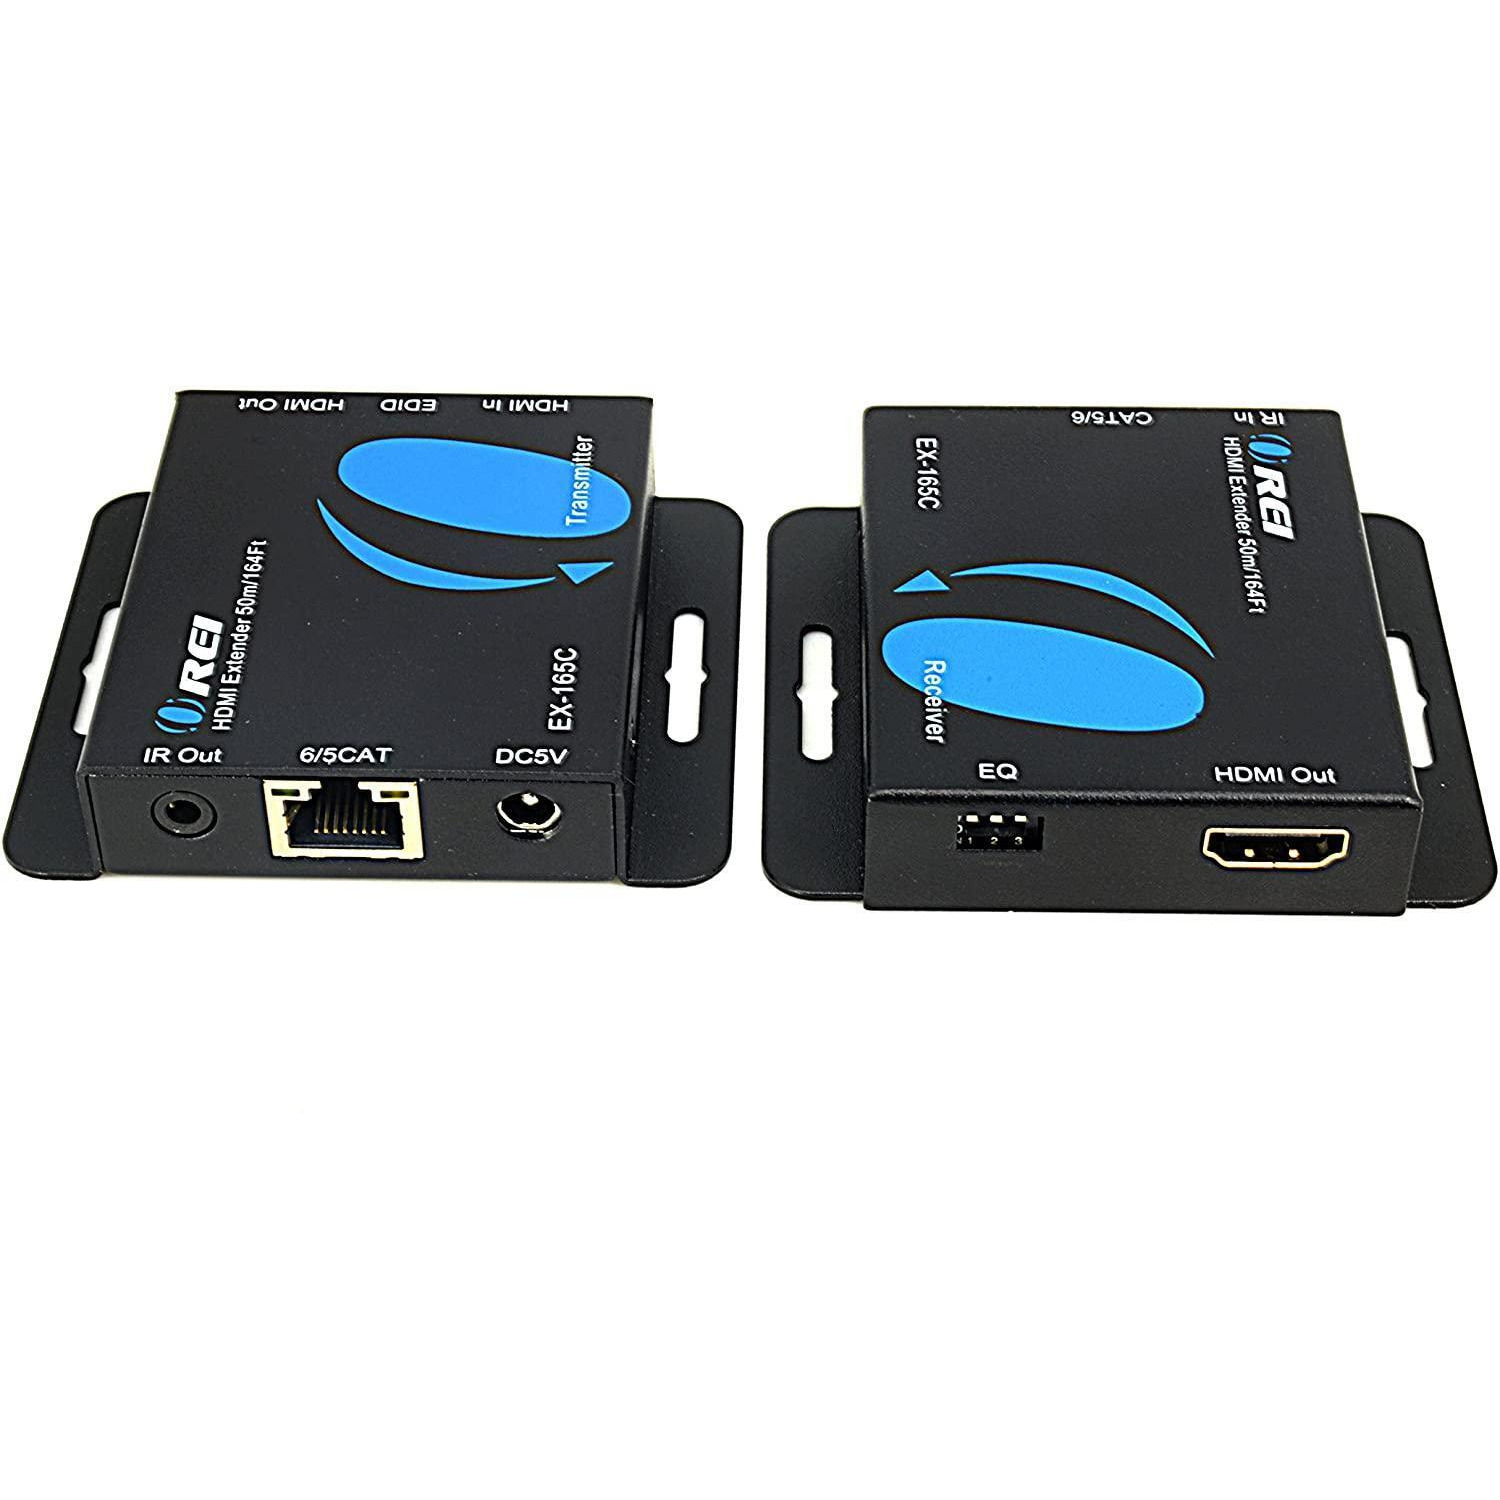 HDMI Extender Over LAN by Orei Single CAT6A/Cat7 Cable Uncompressed 1080P @ 60Hz with IR - Up to 196 ft - Loop Out Function - Digital Full HD, EX-196PRO-K